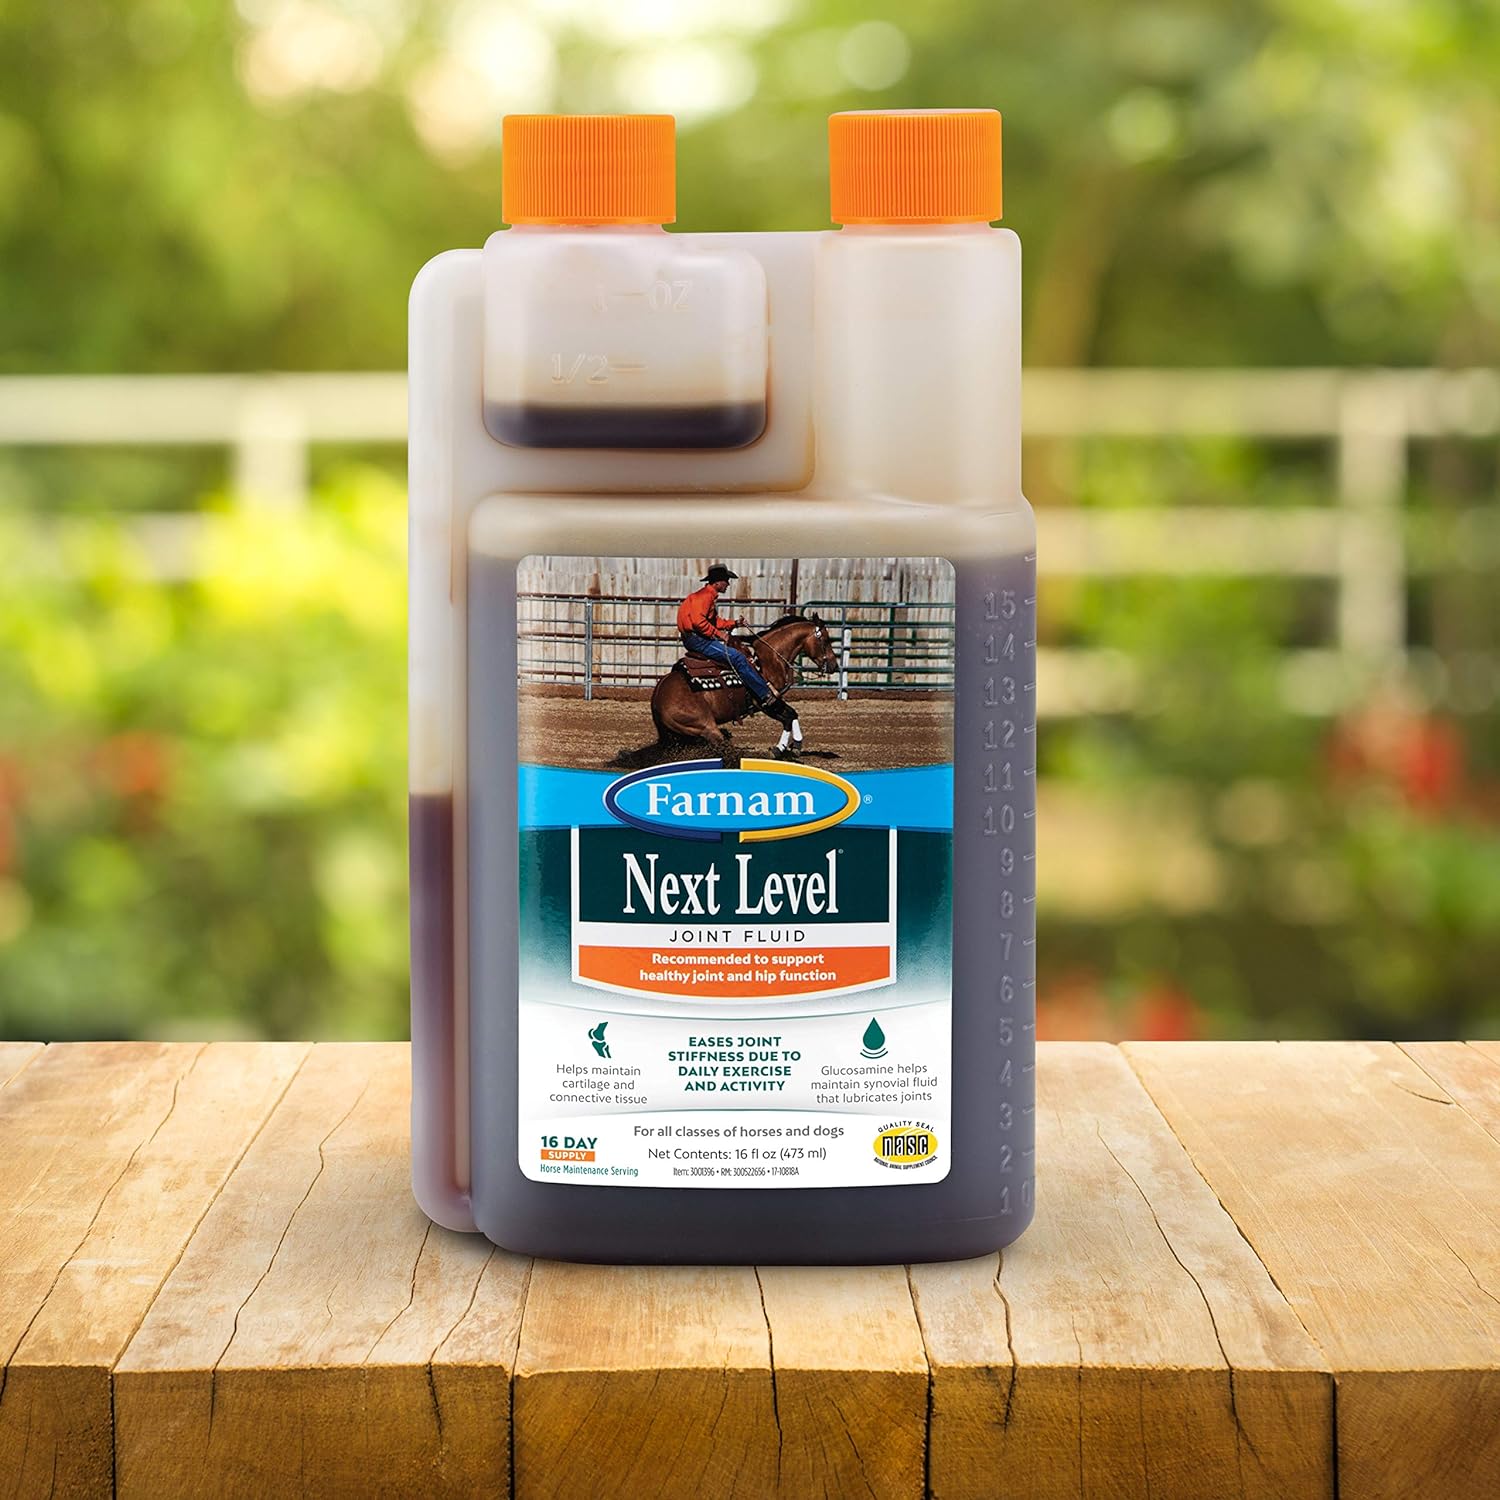 Farnam Next Level Joint Fluid Supplement for horses and